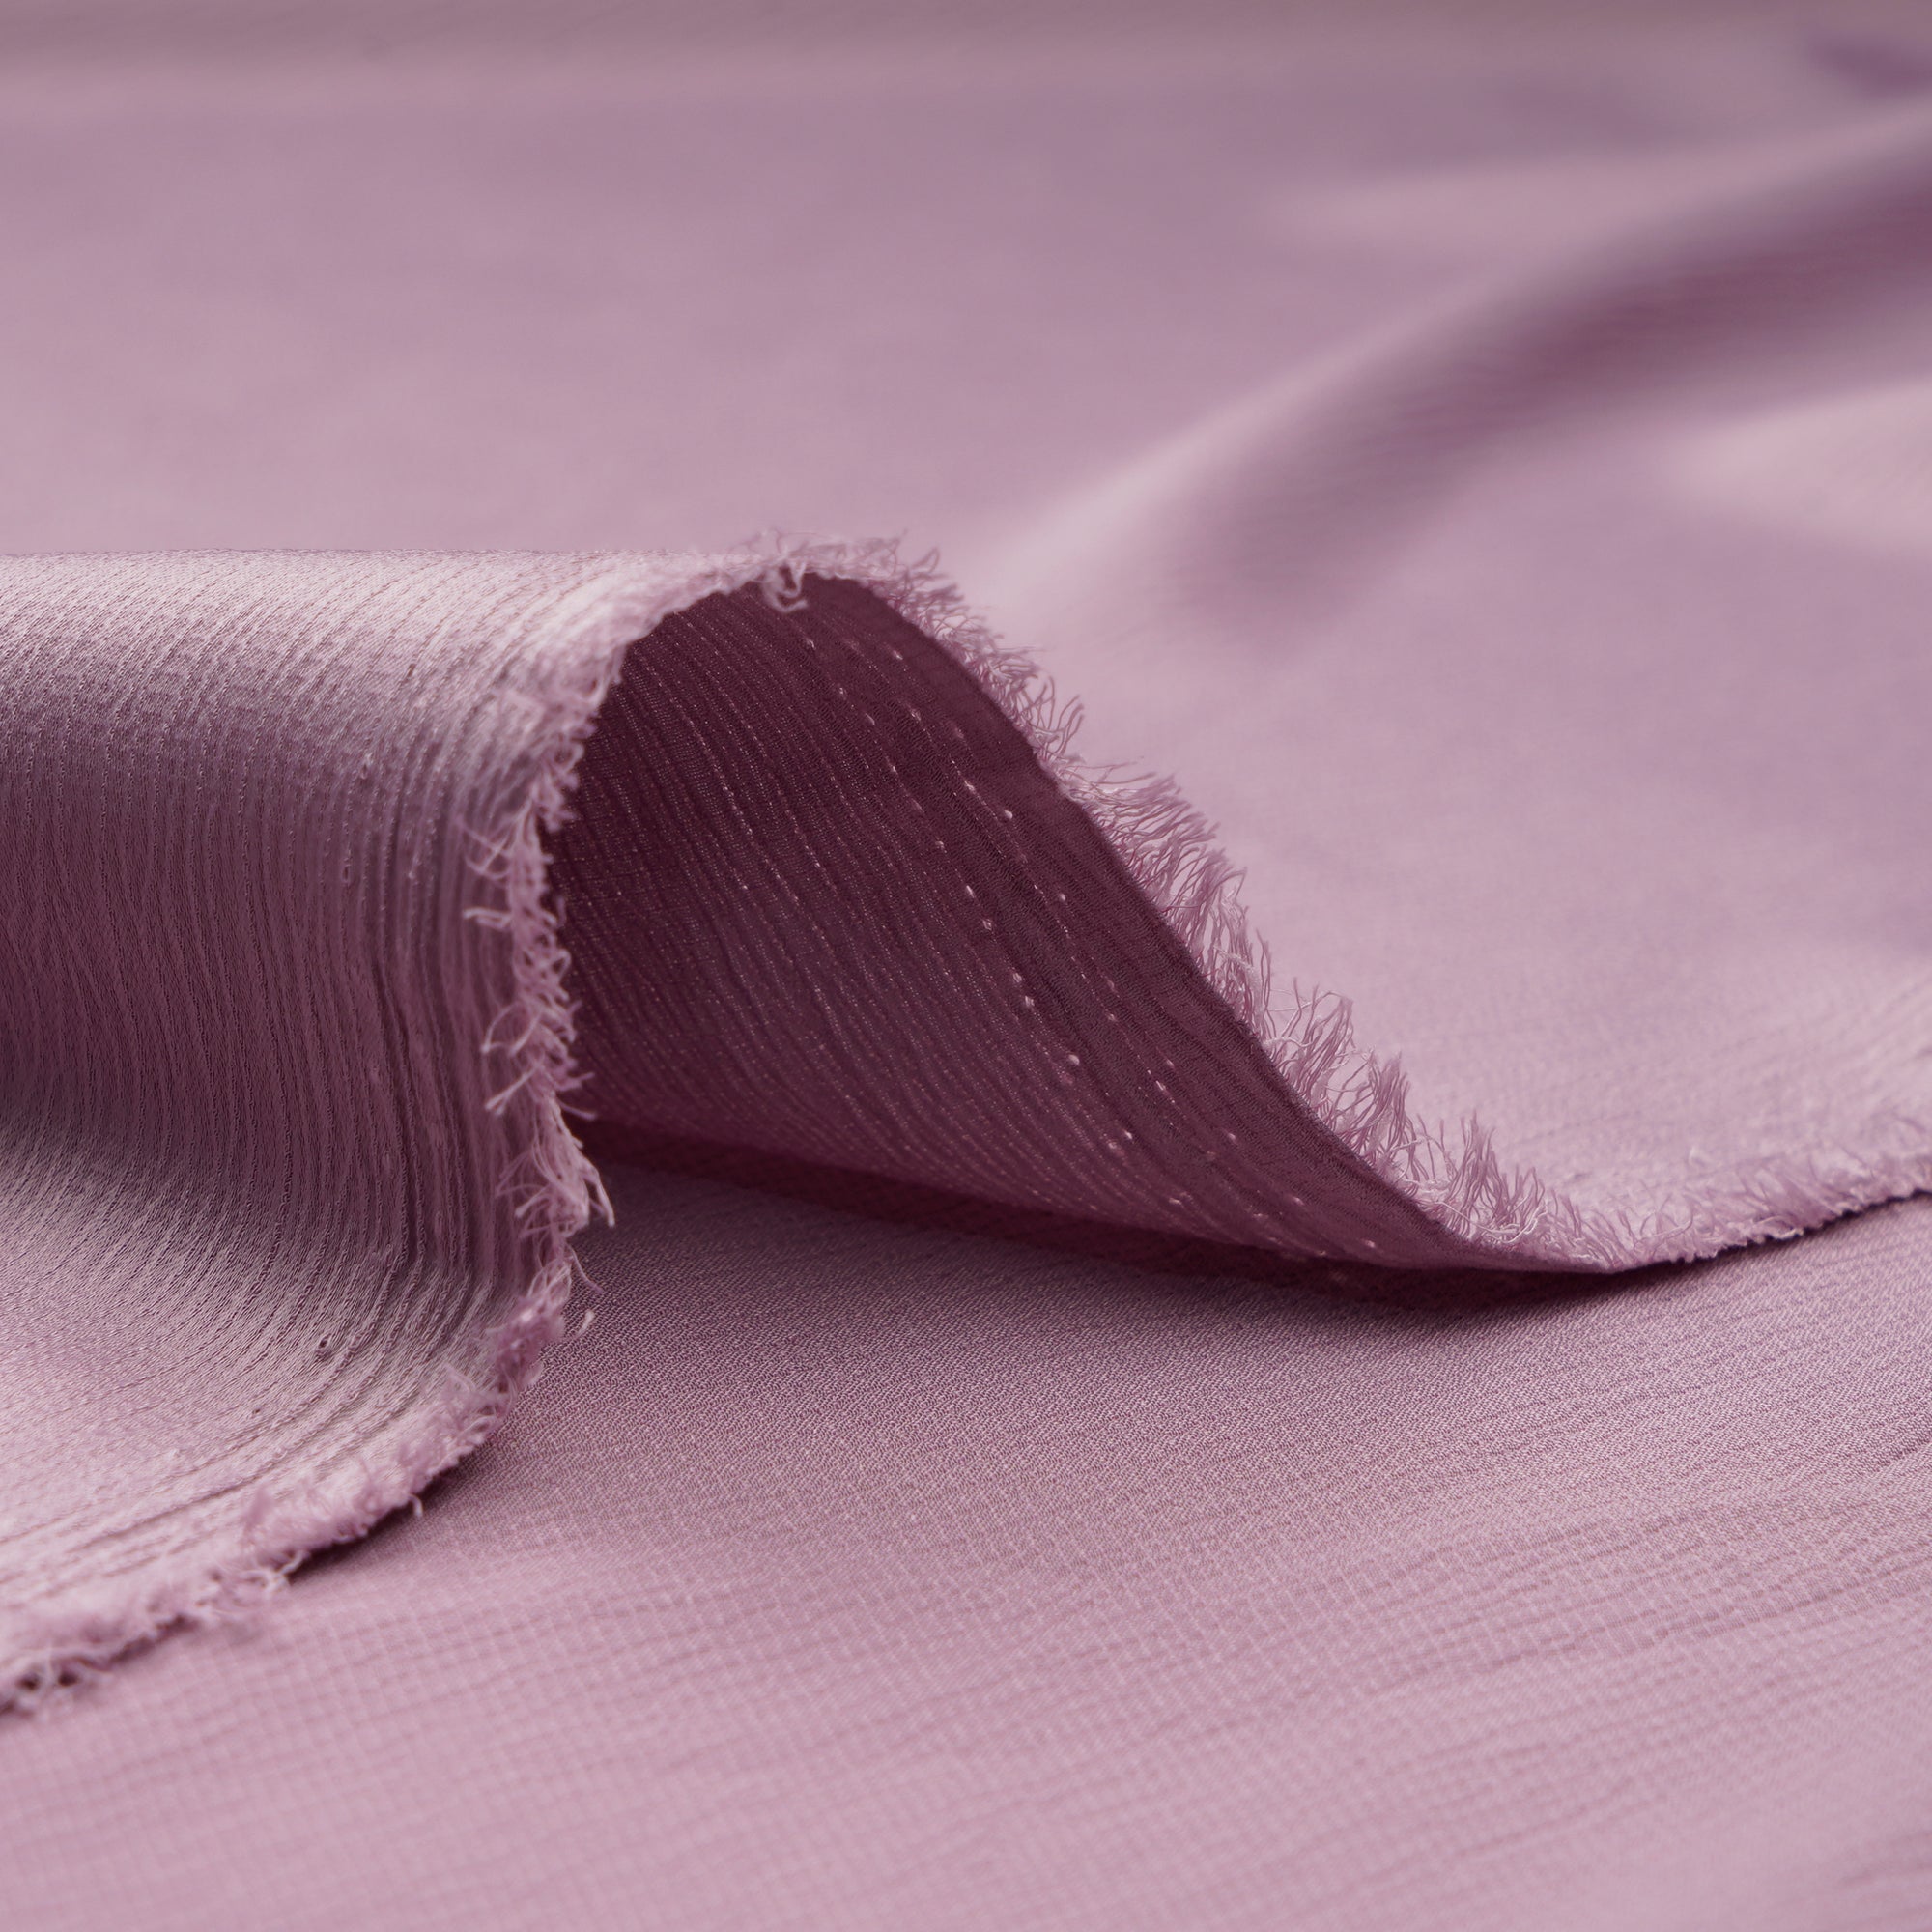 Lavender Solid Dyed Imported Cocktail Satin Fabric (60" Width)